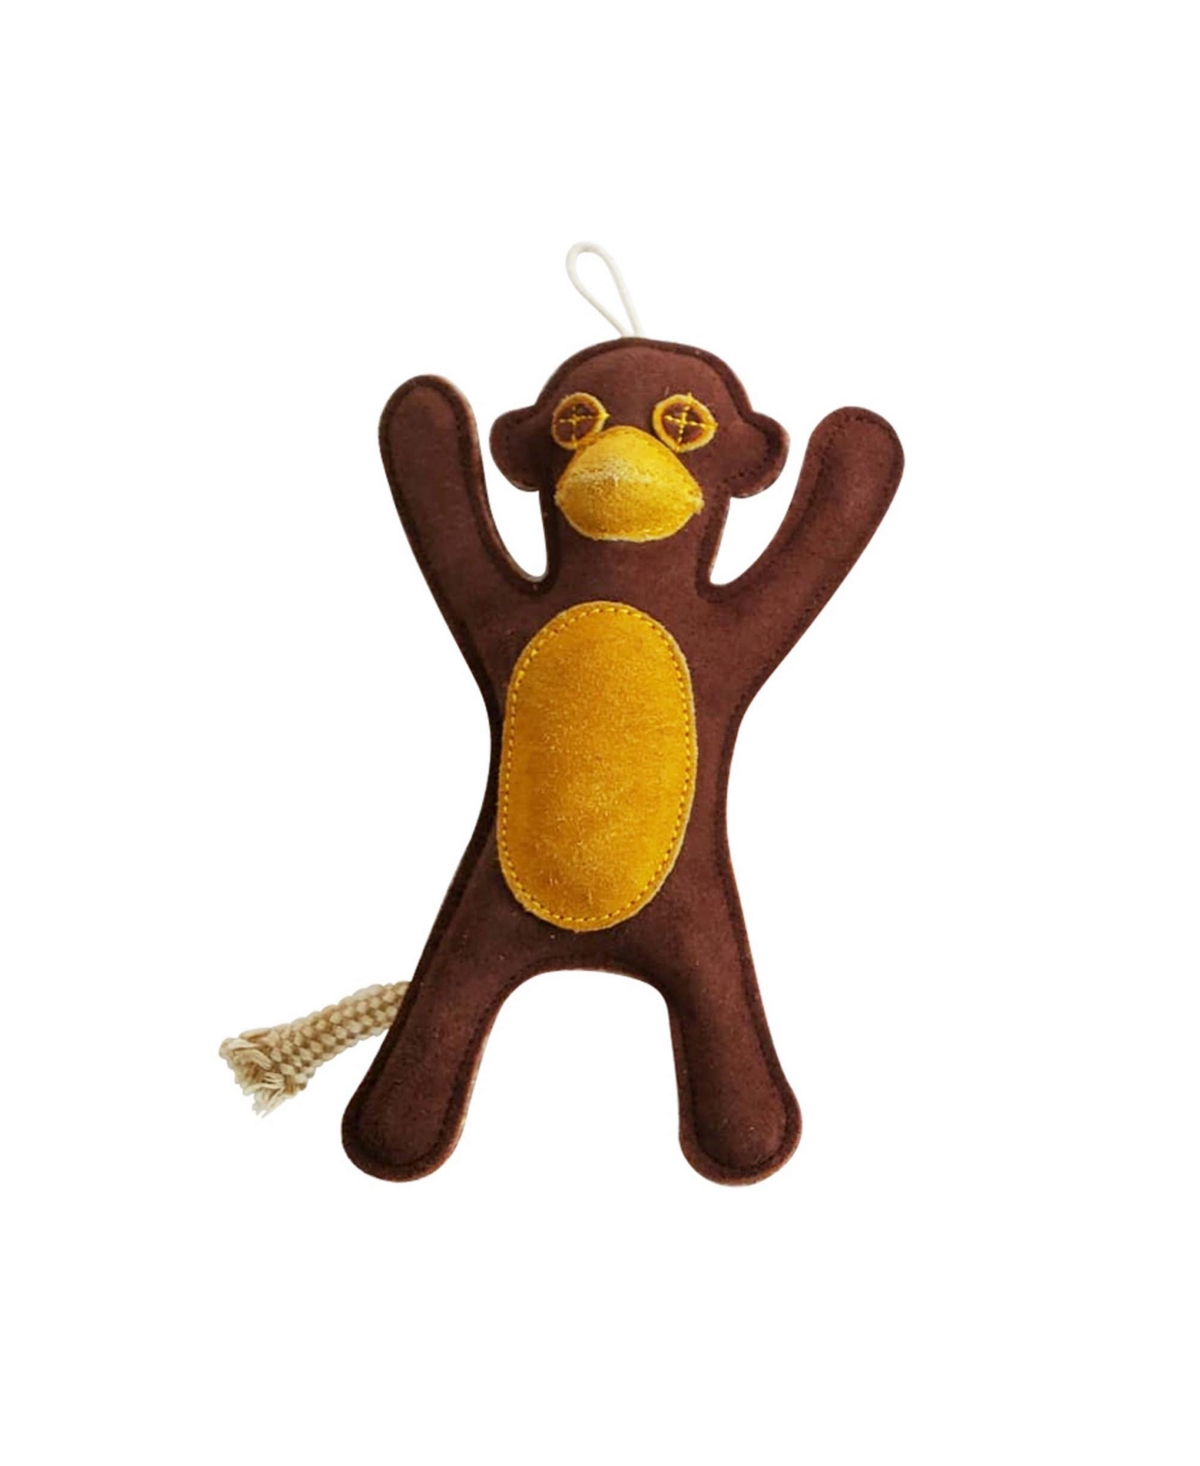 Sustainable Natural Leather Monkey Chew Toy for Dogs - Brown